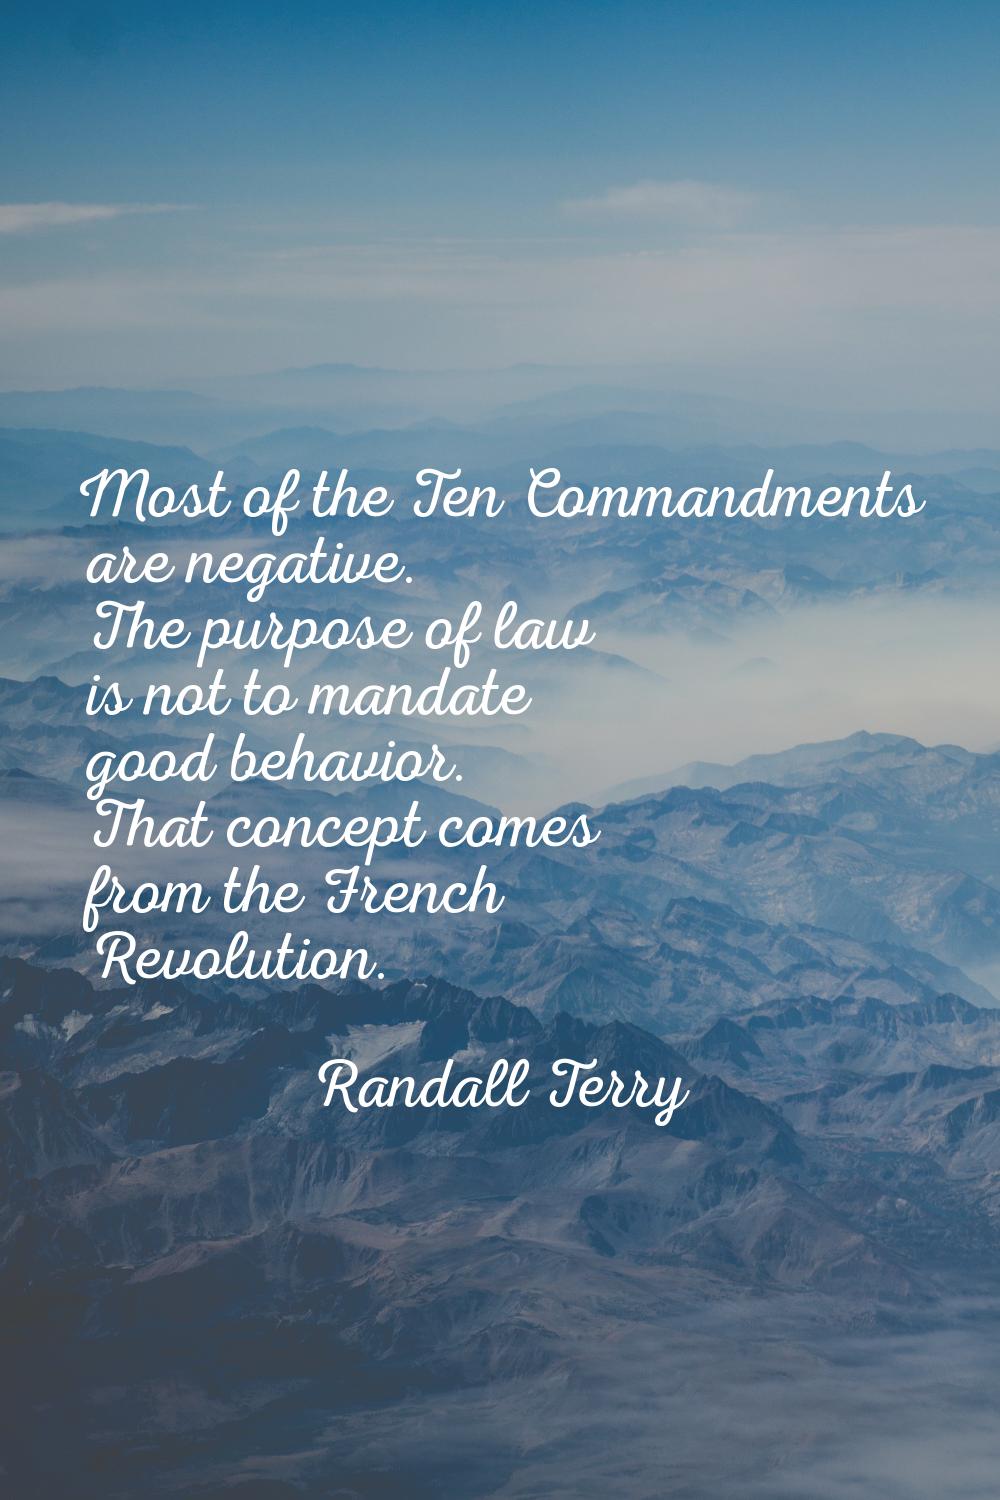 Most of the Ten Commandments are negative. The purpose of law is not to mandate good behavior. That